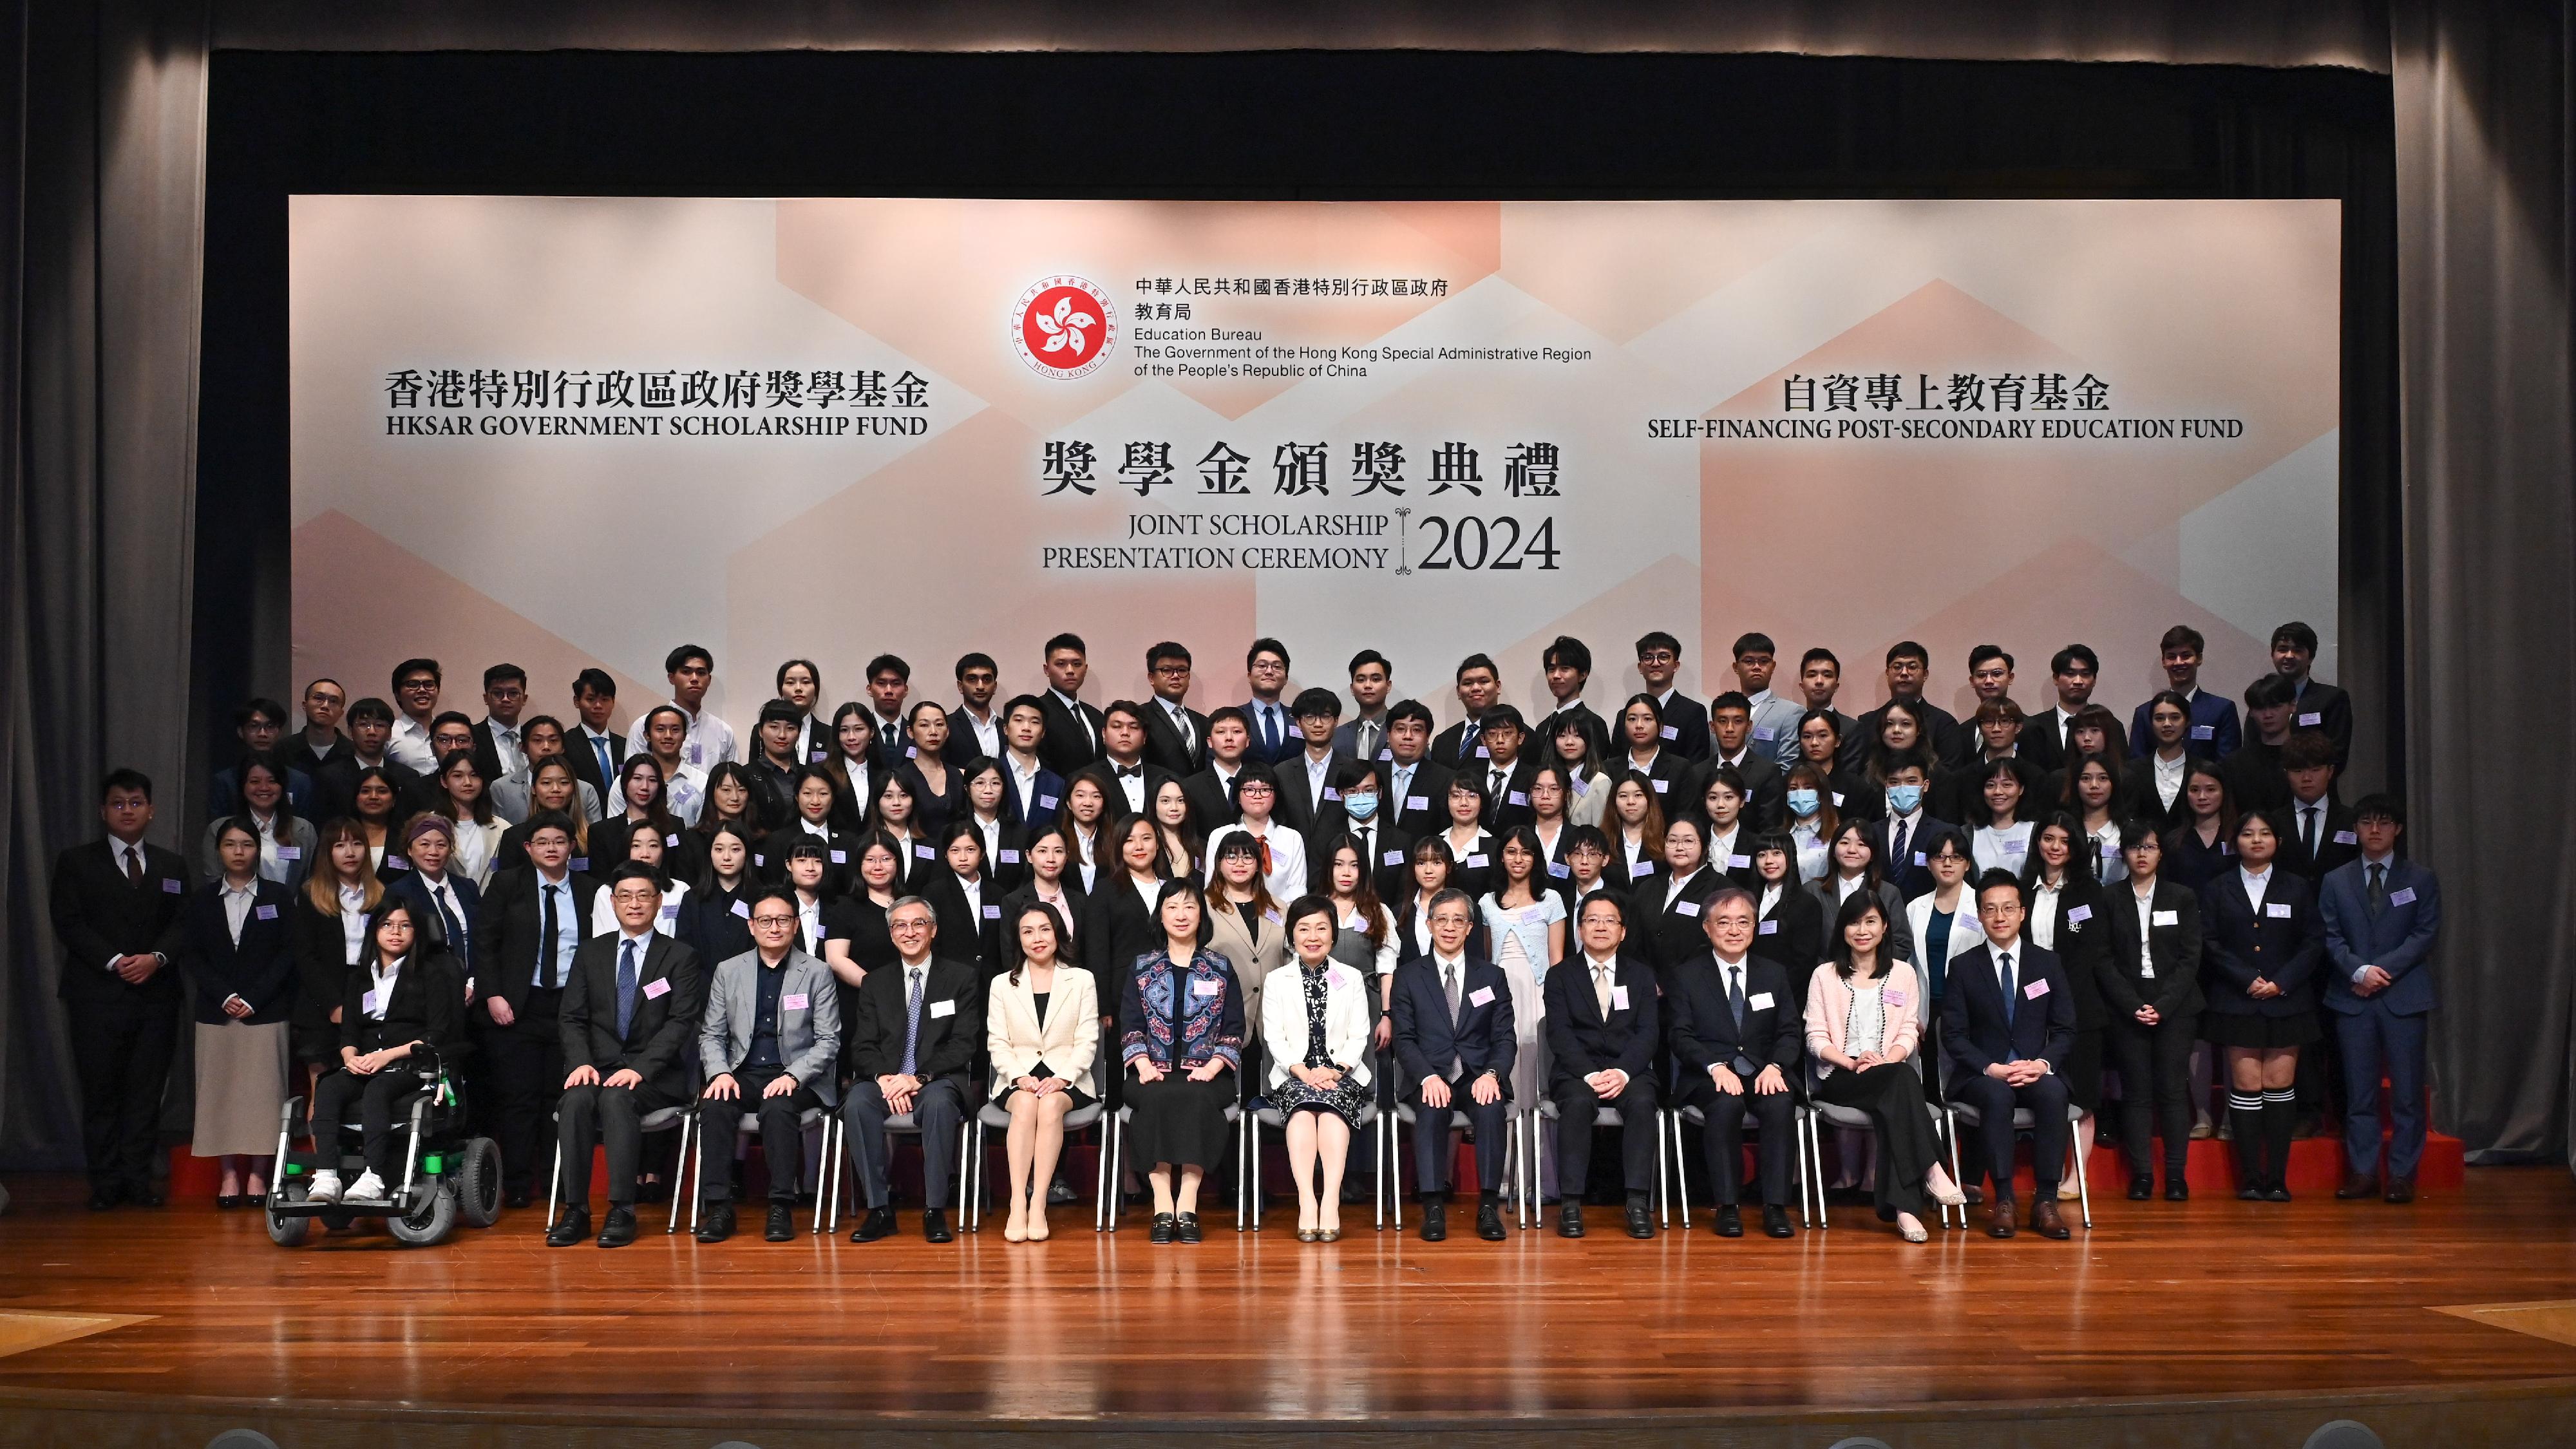 The Education Bureau held the HKSAR Government Scholarship Fund and Self-financing Post-secondary Education Fund Joint Scholarship Presentation Ceremony today (April 25). The Secretary for Education, Dr Choi Yuk-lin (front row, sixth right), the Permanent Secretary for Education, Ms Michelle Li (front row, sixth left), and other guests are pictured with students who are awarded scholarships under the Self-financing Post-secondary Education Fund.